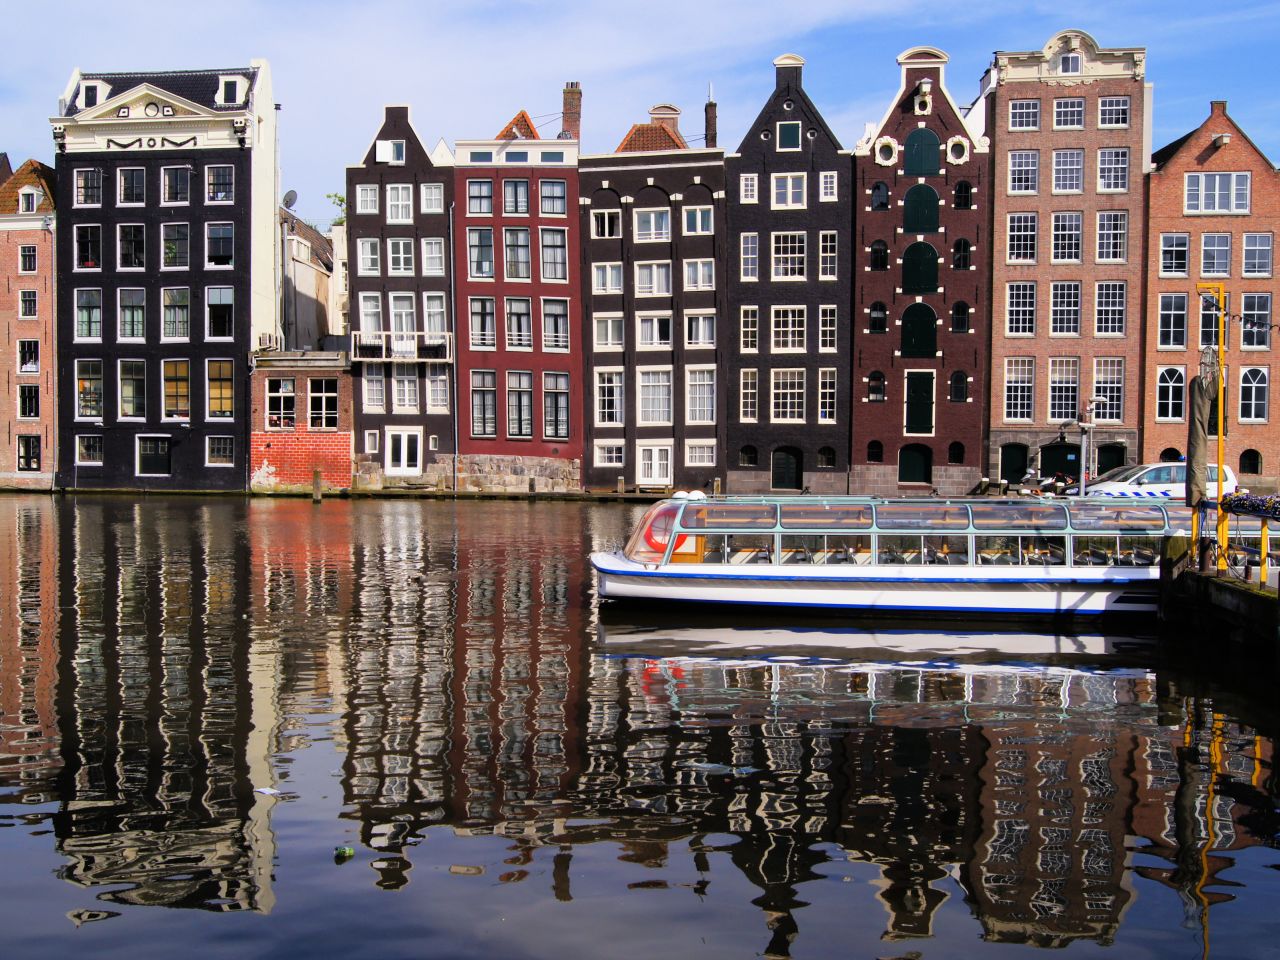 Traditional houses line canals in Amsterdam, the official capital of the Netherlands.